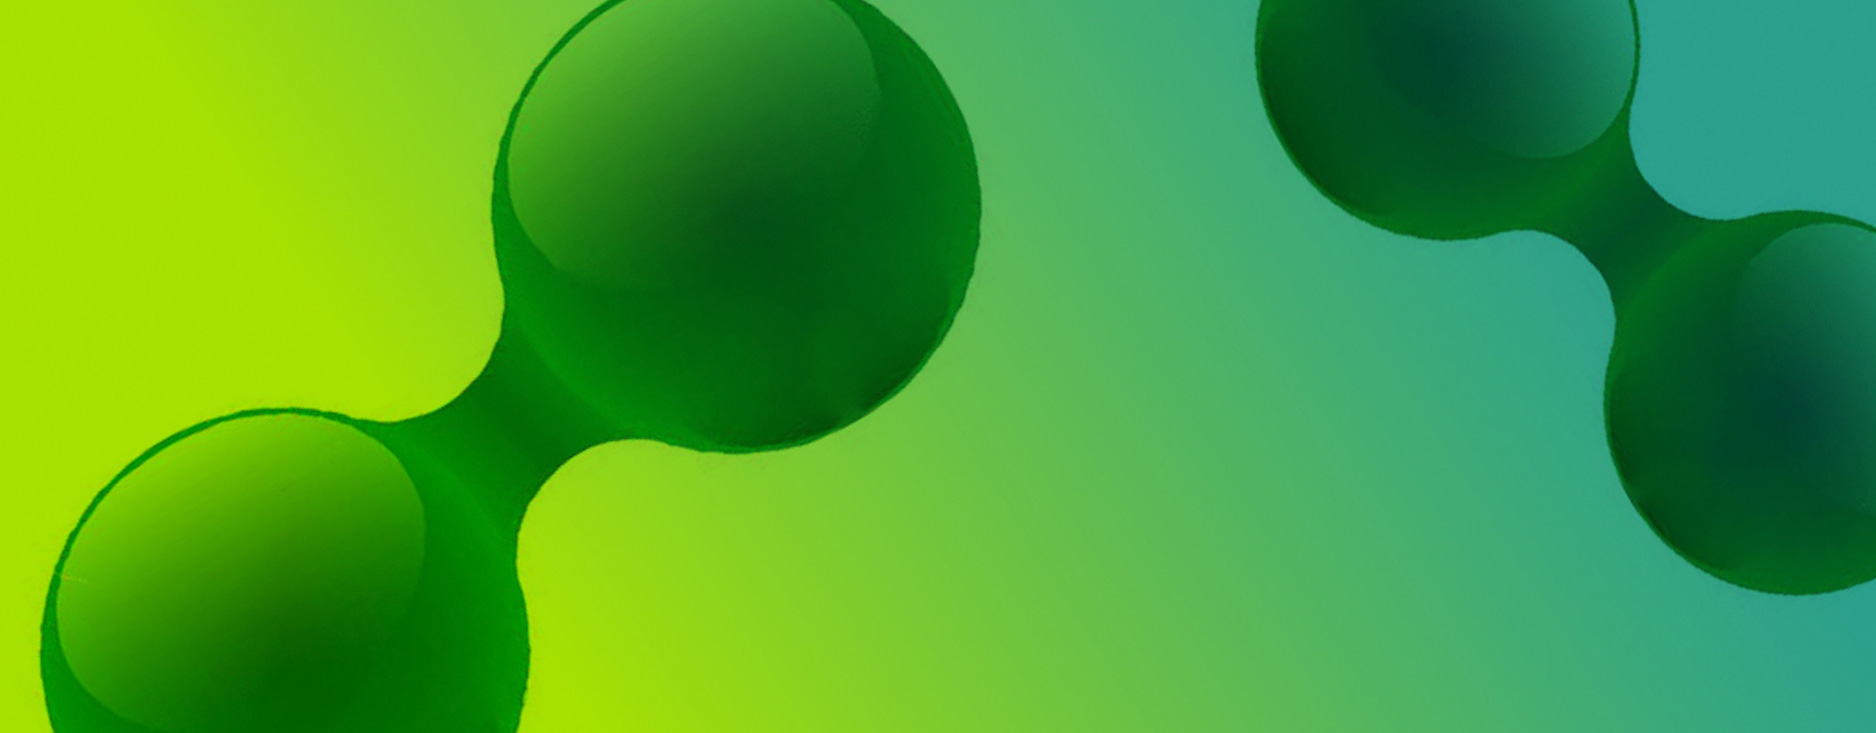 An image illustrating green hydrogen as green drops